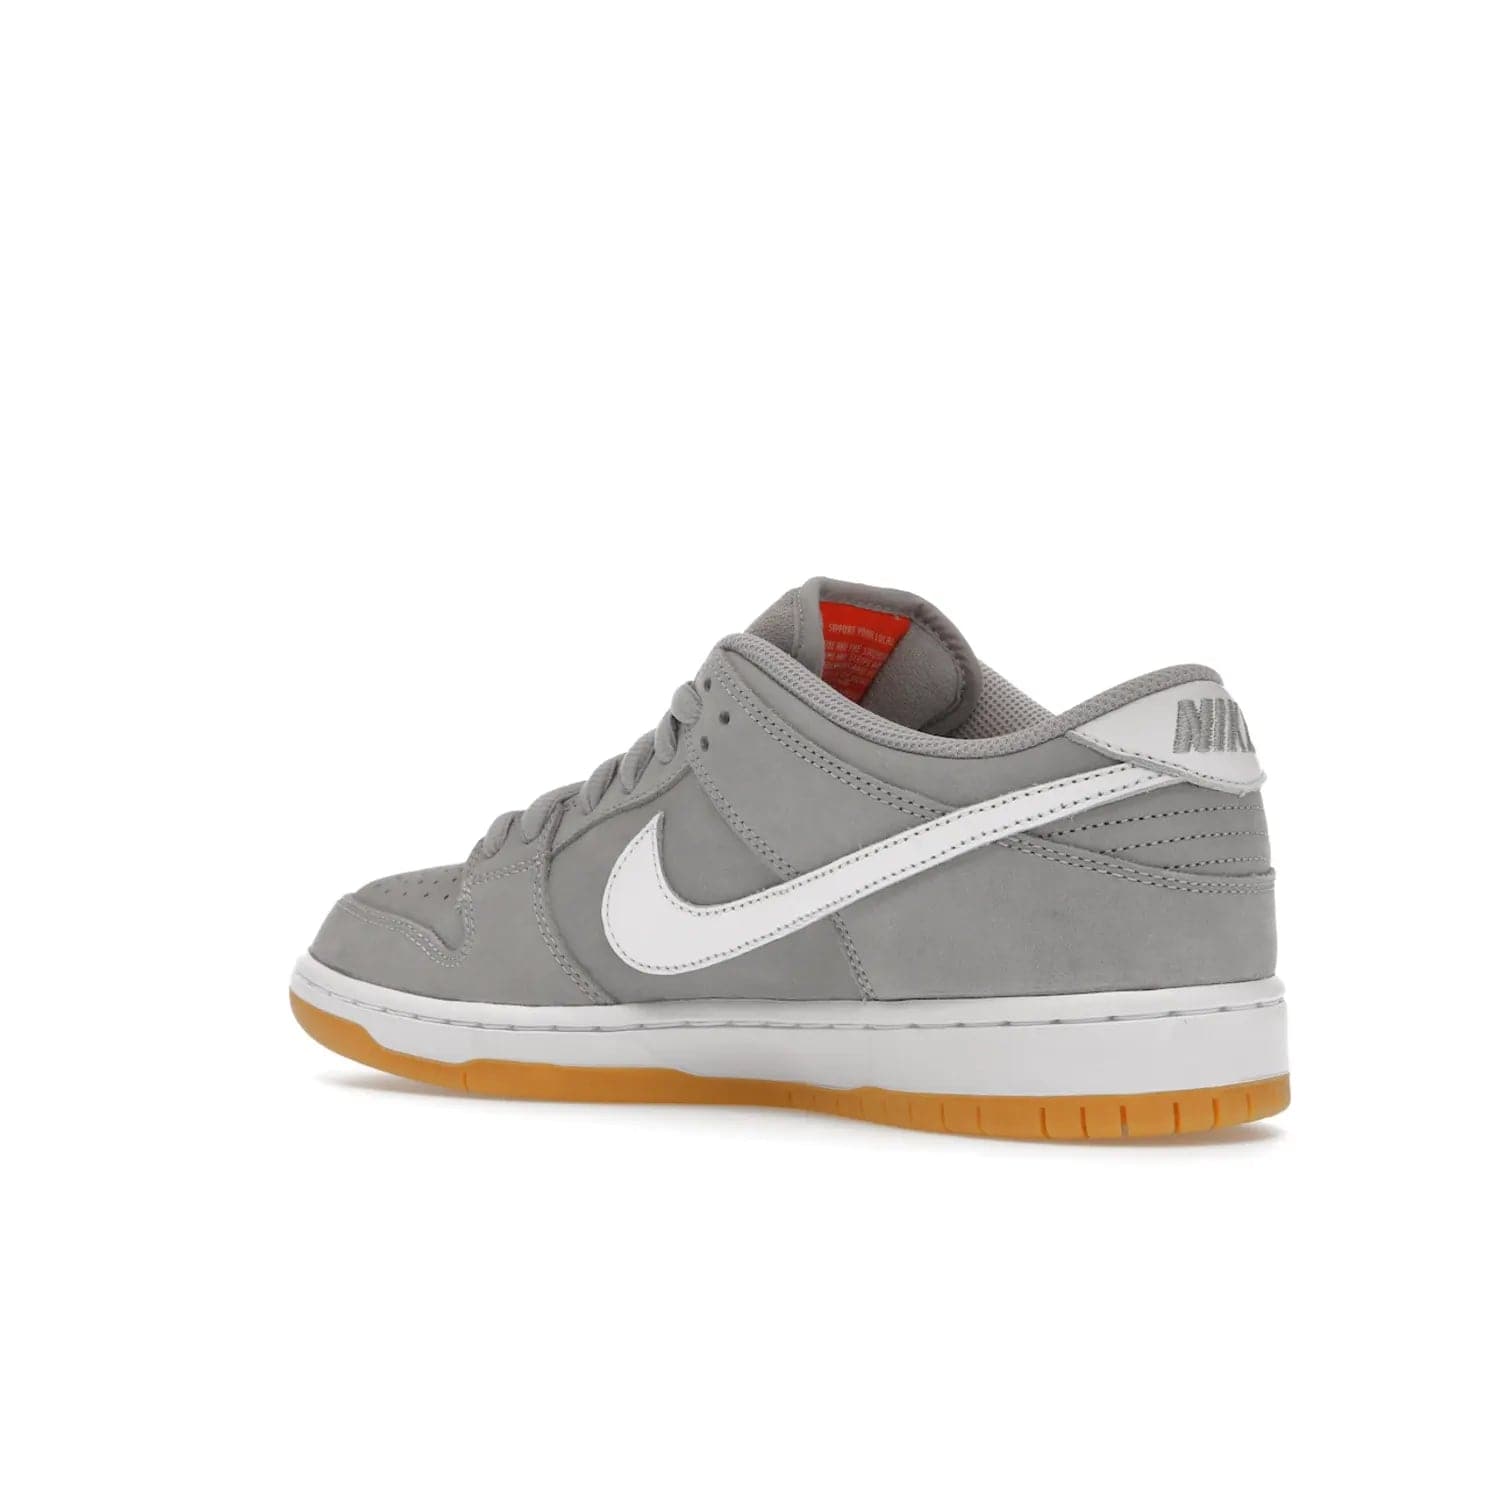 Nike SB Dunk Low Pro ISO Orange Label Wolf Grey Gum - Image 23 - Only at www.BallersClubKickz.com - Introducing Nike's SB Dunk Low Pro ISO Orange Label Wolf Grey Gum - a stylish shoe with a premium Wolf Grey upper, white leather Nike Swoosh, and an eye-catching gum outsole. With special Nike branding and packaging, this shoe adds a unique fashion statement. Out Feb. 24, 2023.